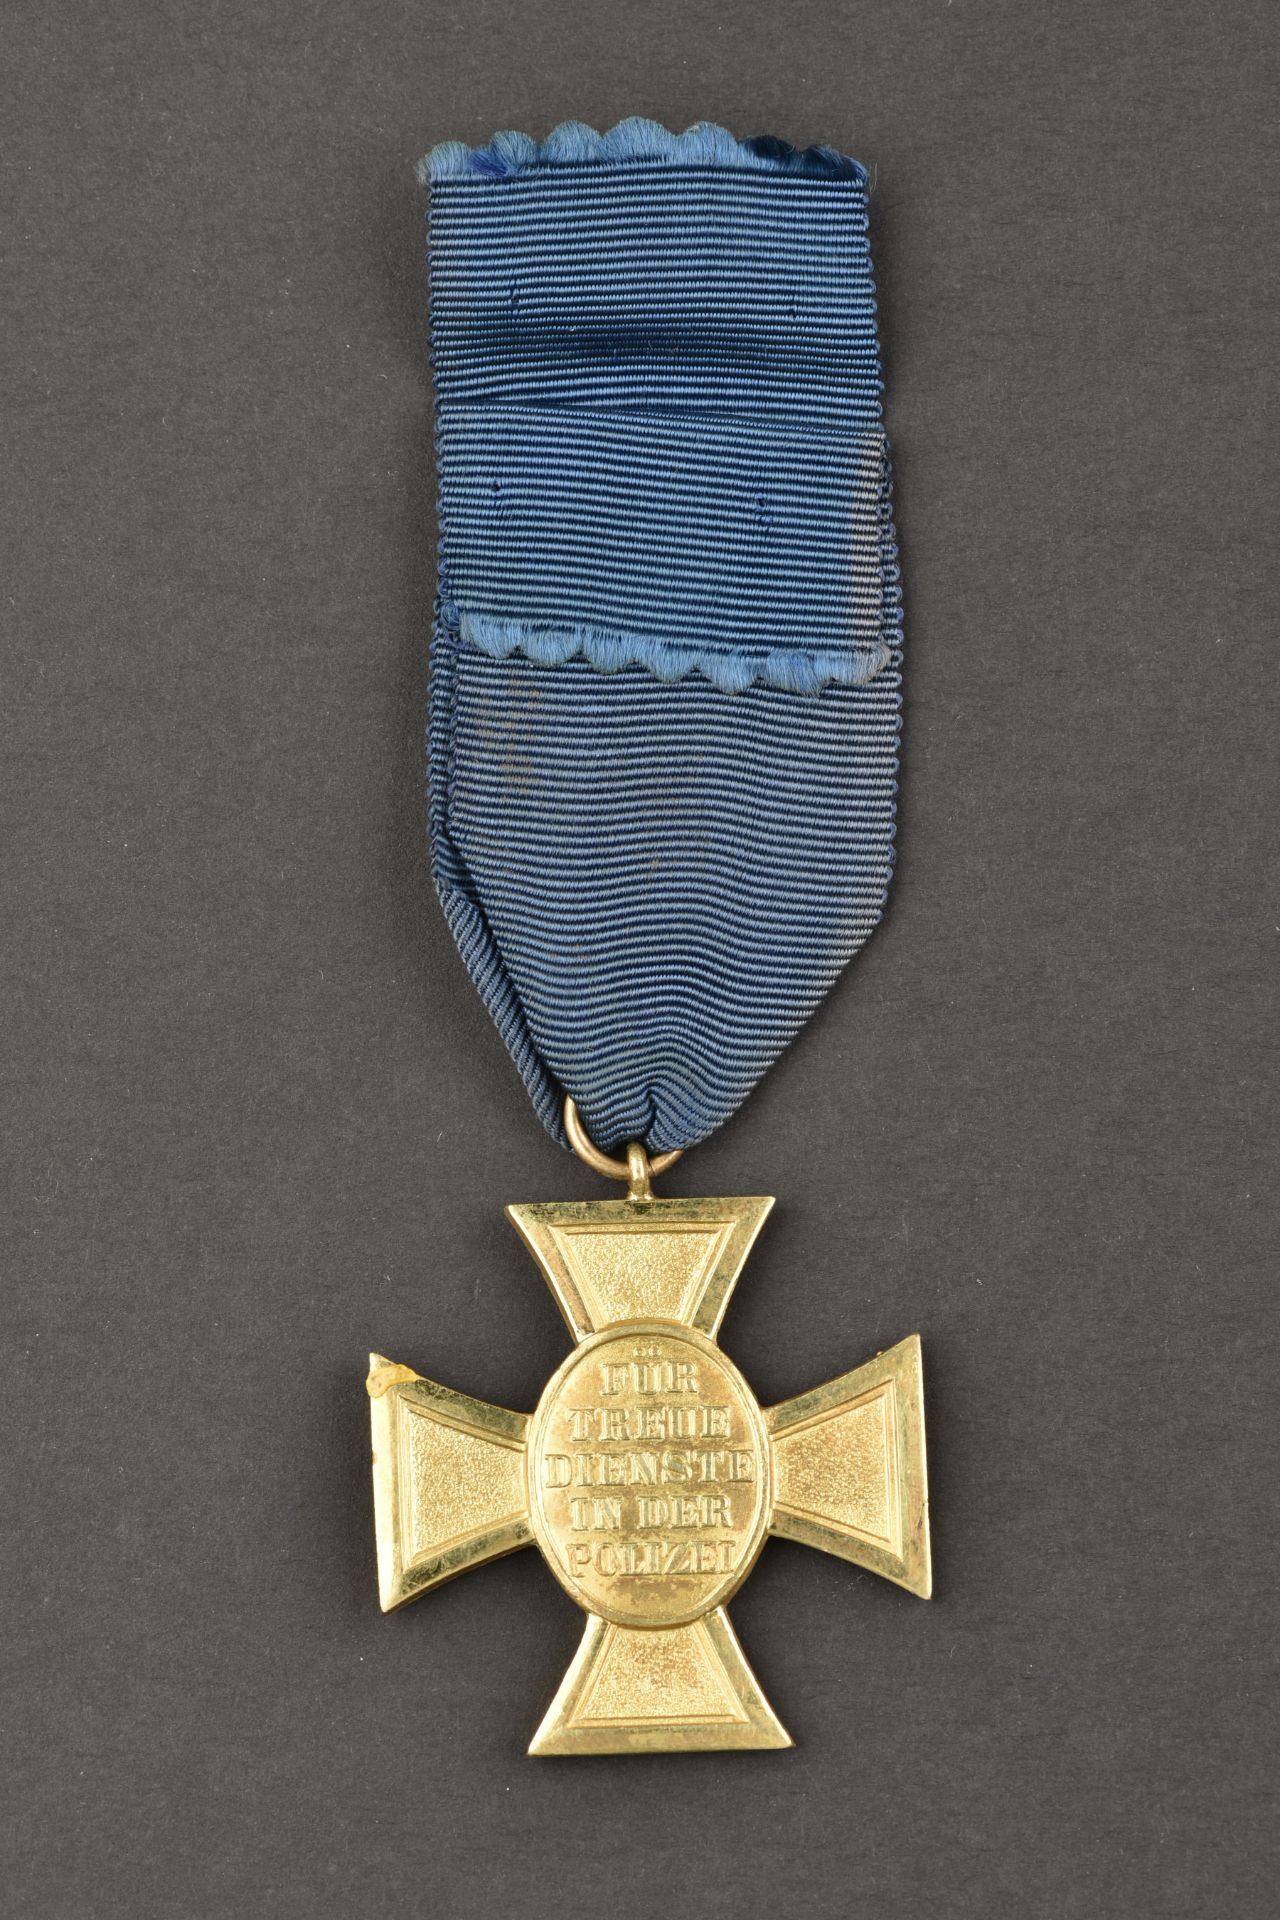 Medaille service Polizei. Polizei service medal. - Image 3 of 4